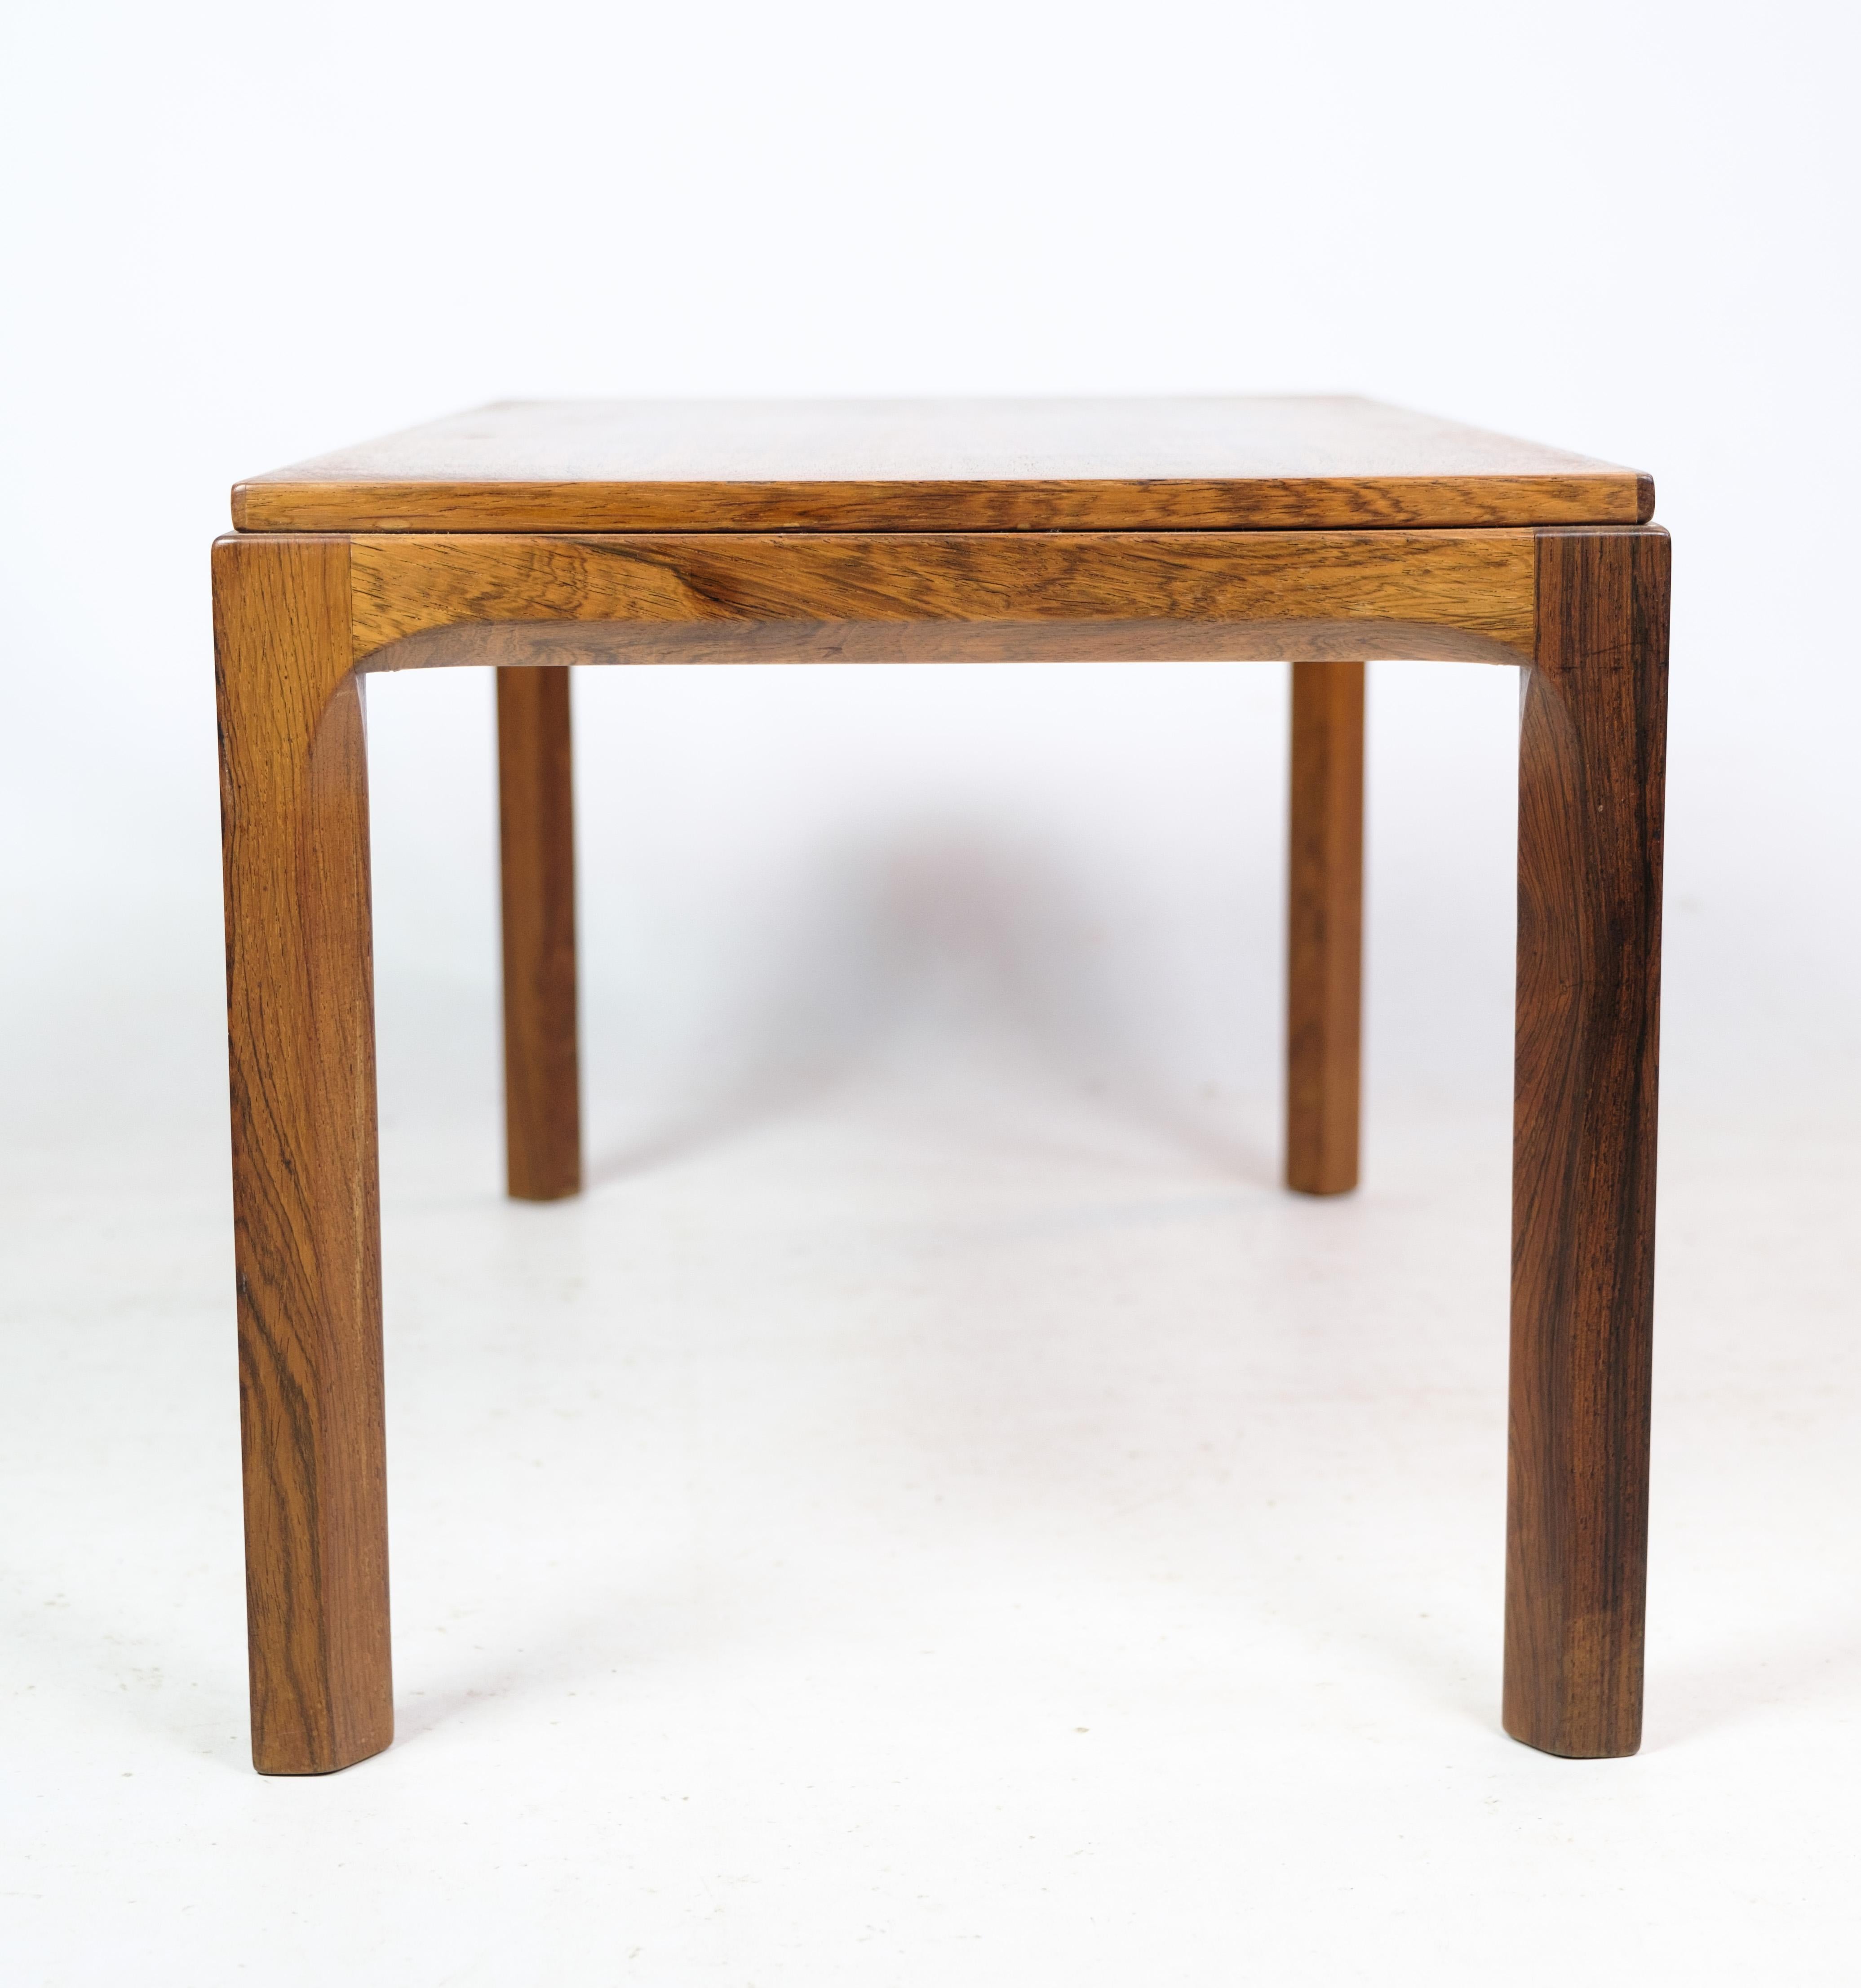 Side table, designed by Aksel Kjersgaard in the wood type rosewood for Odder Møbler. Model number 381. In very good condition. Aksel Kjersgaard is known for his detail for craftsmanship. He mostly worked with teak and rosewood.

This product will be